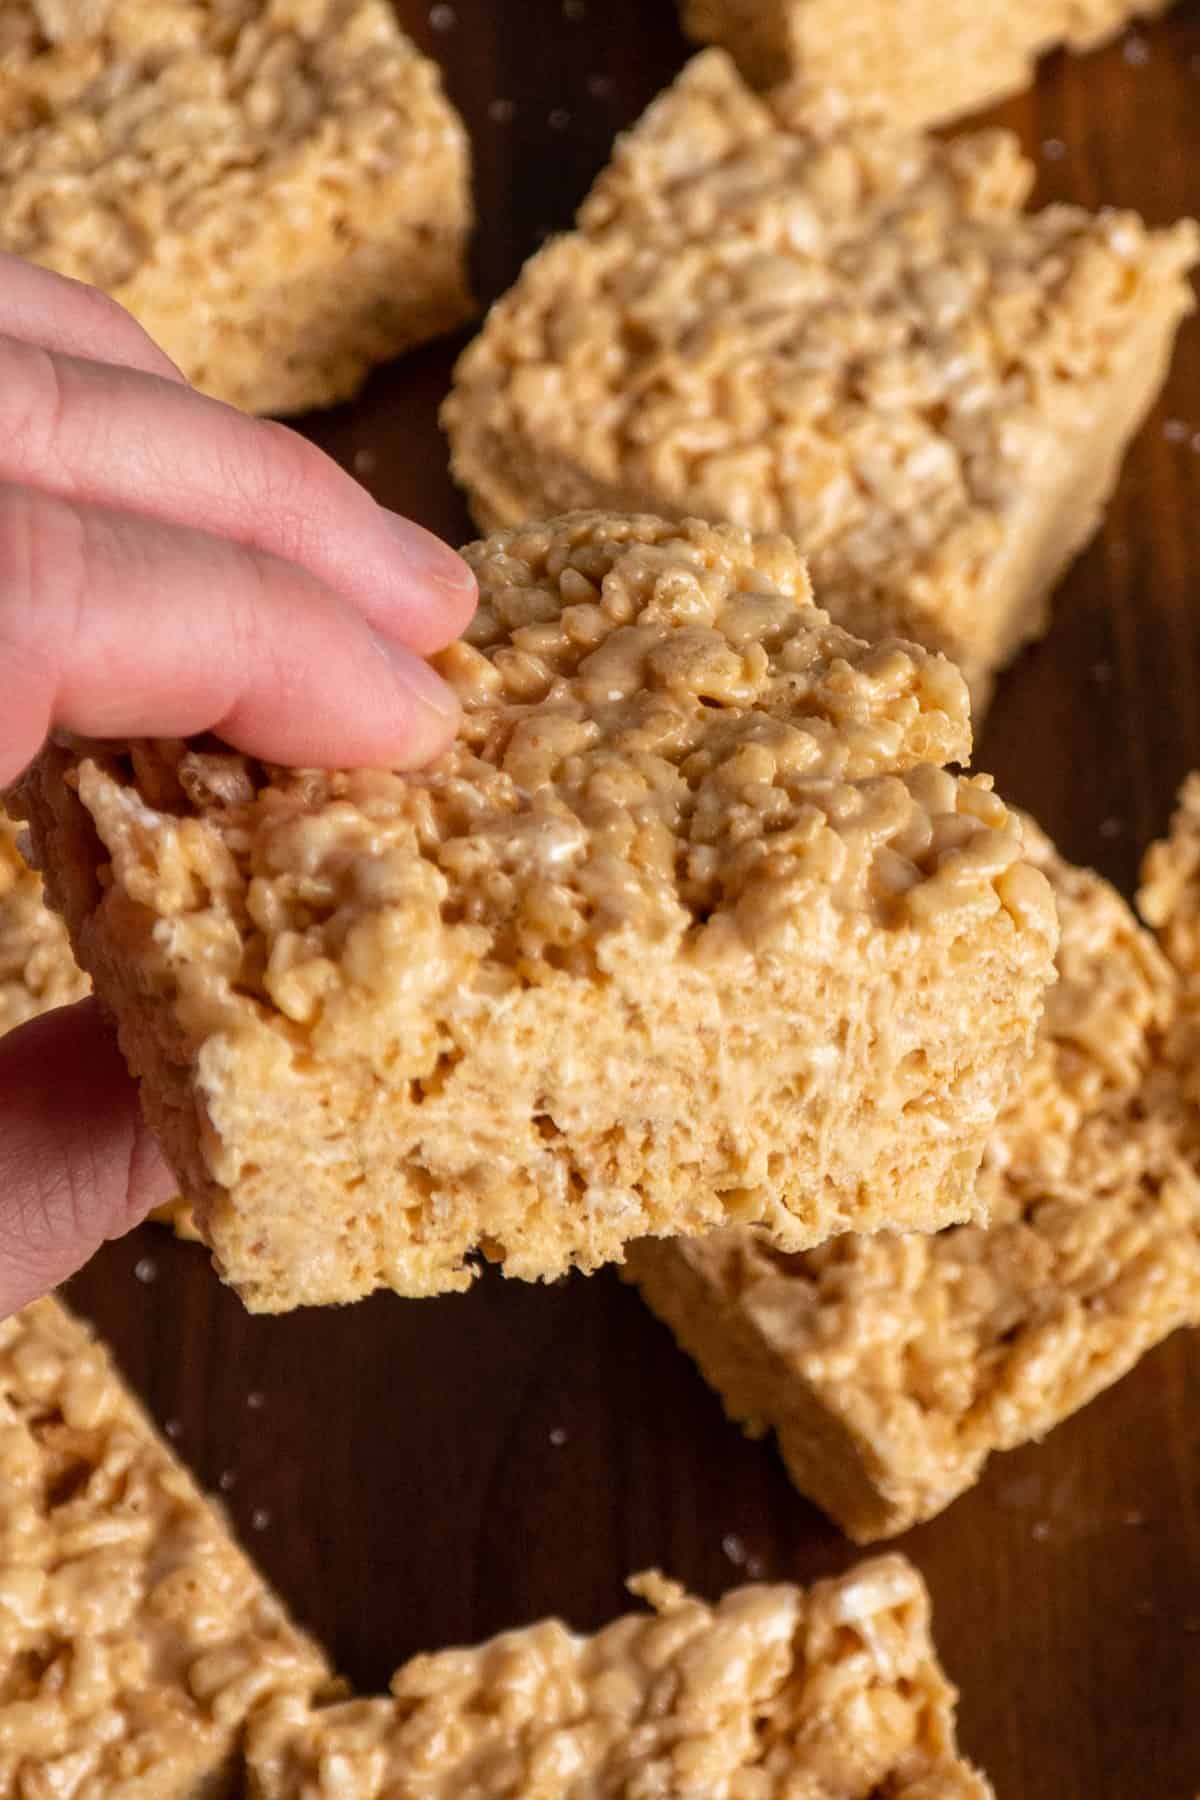 A hand holding a rice krispie treat.